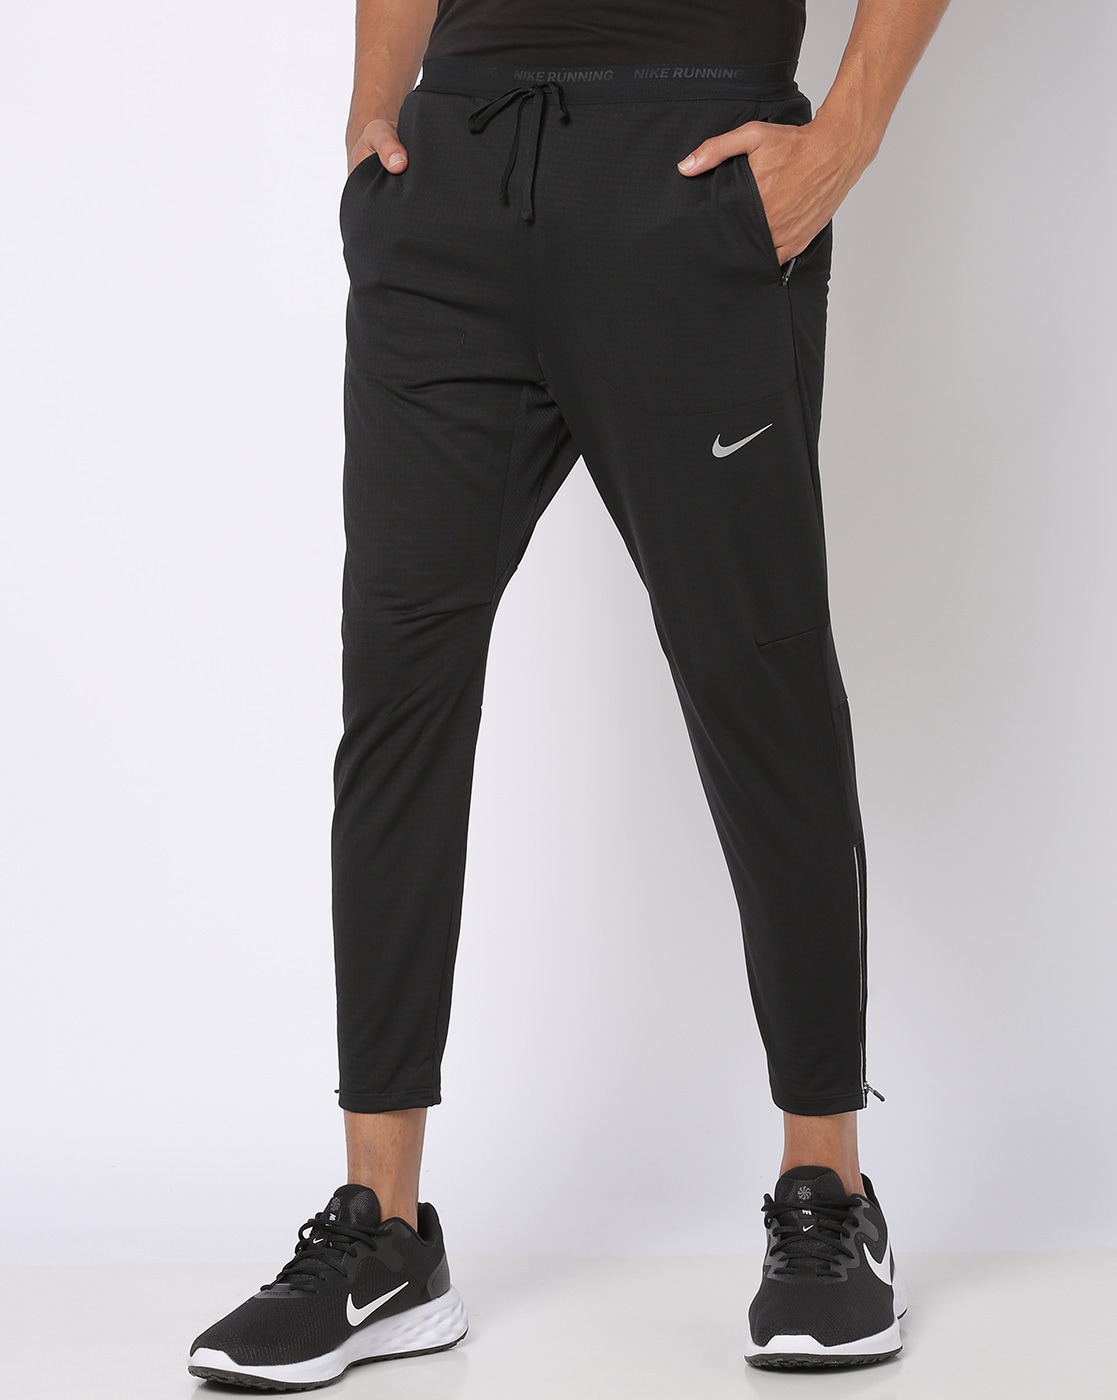 Buy Nike Boy's Regular Fit Polyester Track Pants (Grey_4) at Amazon.in